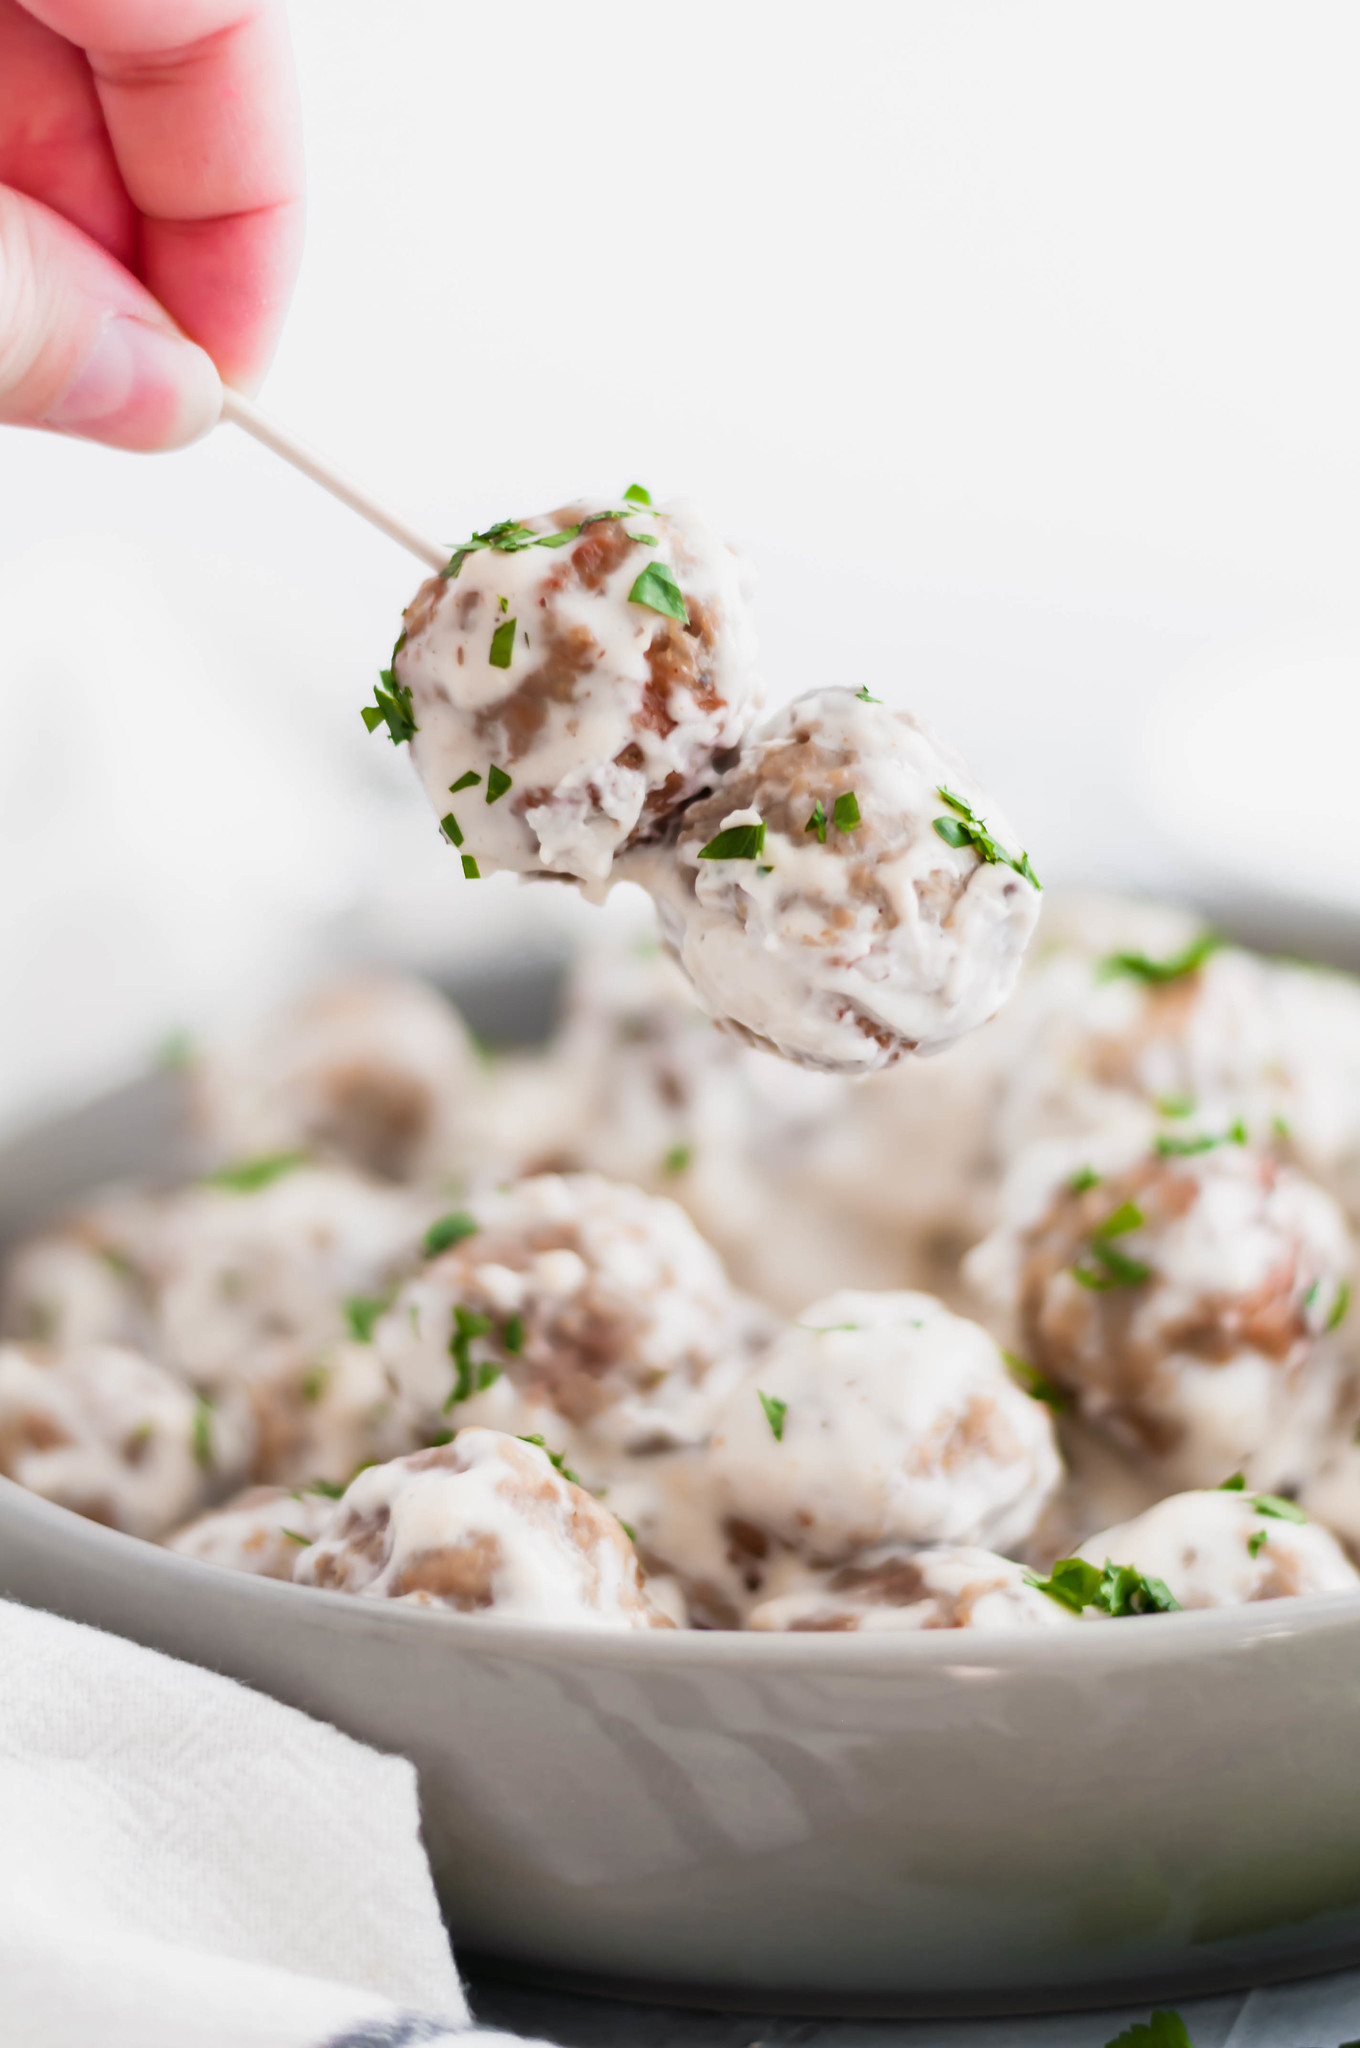 Only 3 ingredients and a few hours in the slow cooker are needed to make these super simple and delicious 3 Ingredient Swedish Meatballs. Great for party or holiday appetizers. A yummy dinner option served over pasta or rice.